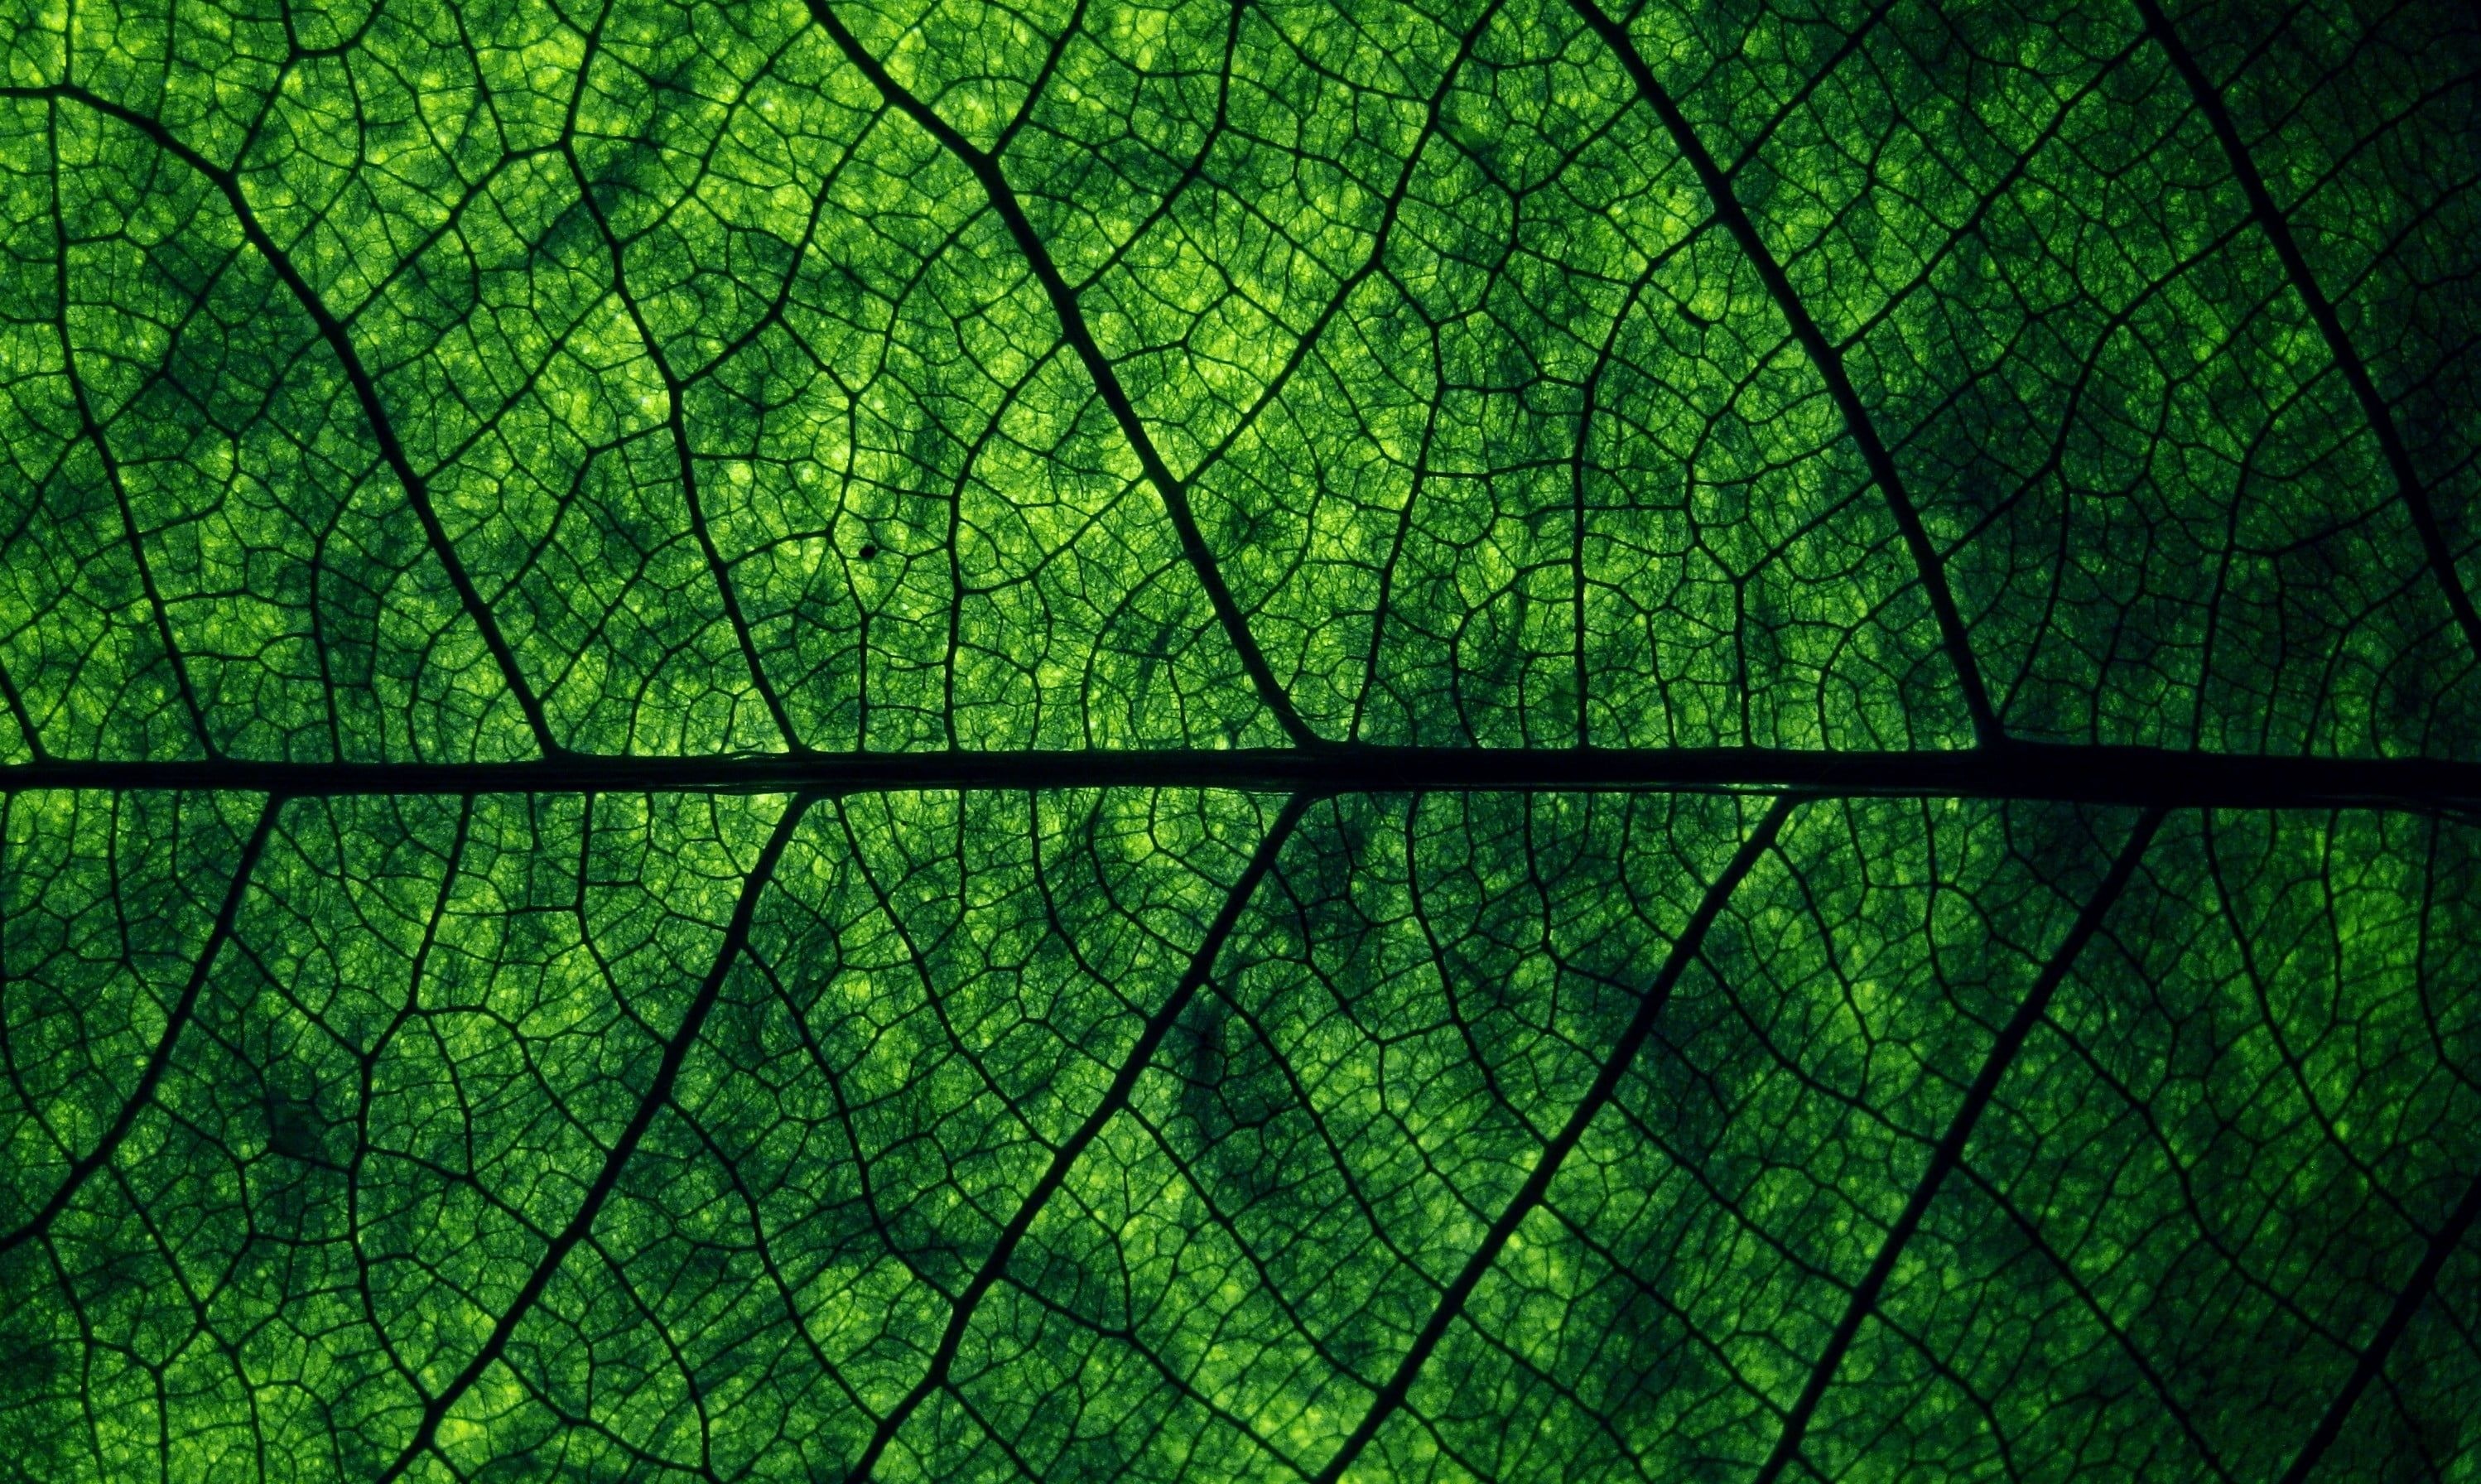 Green Leaf: The beauty of Nature, Transparent structure of a complex citrus leaf. 3000x1800 HD Wallpaper.